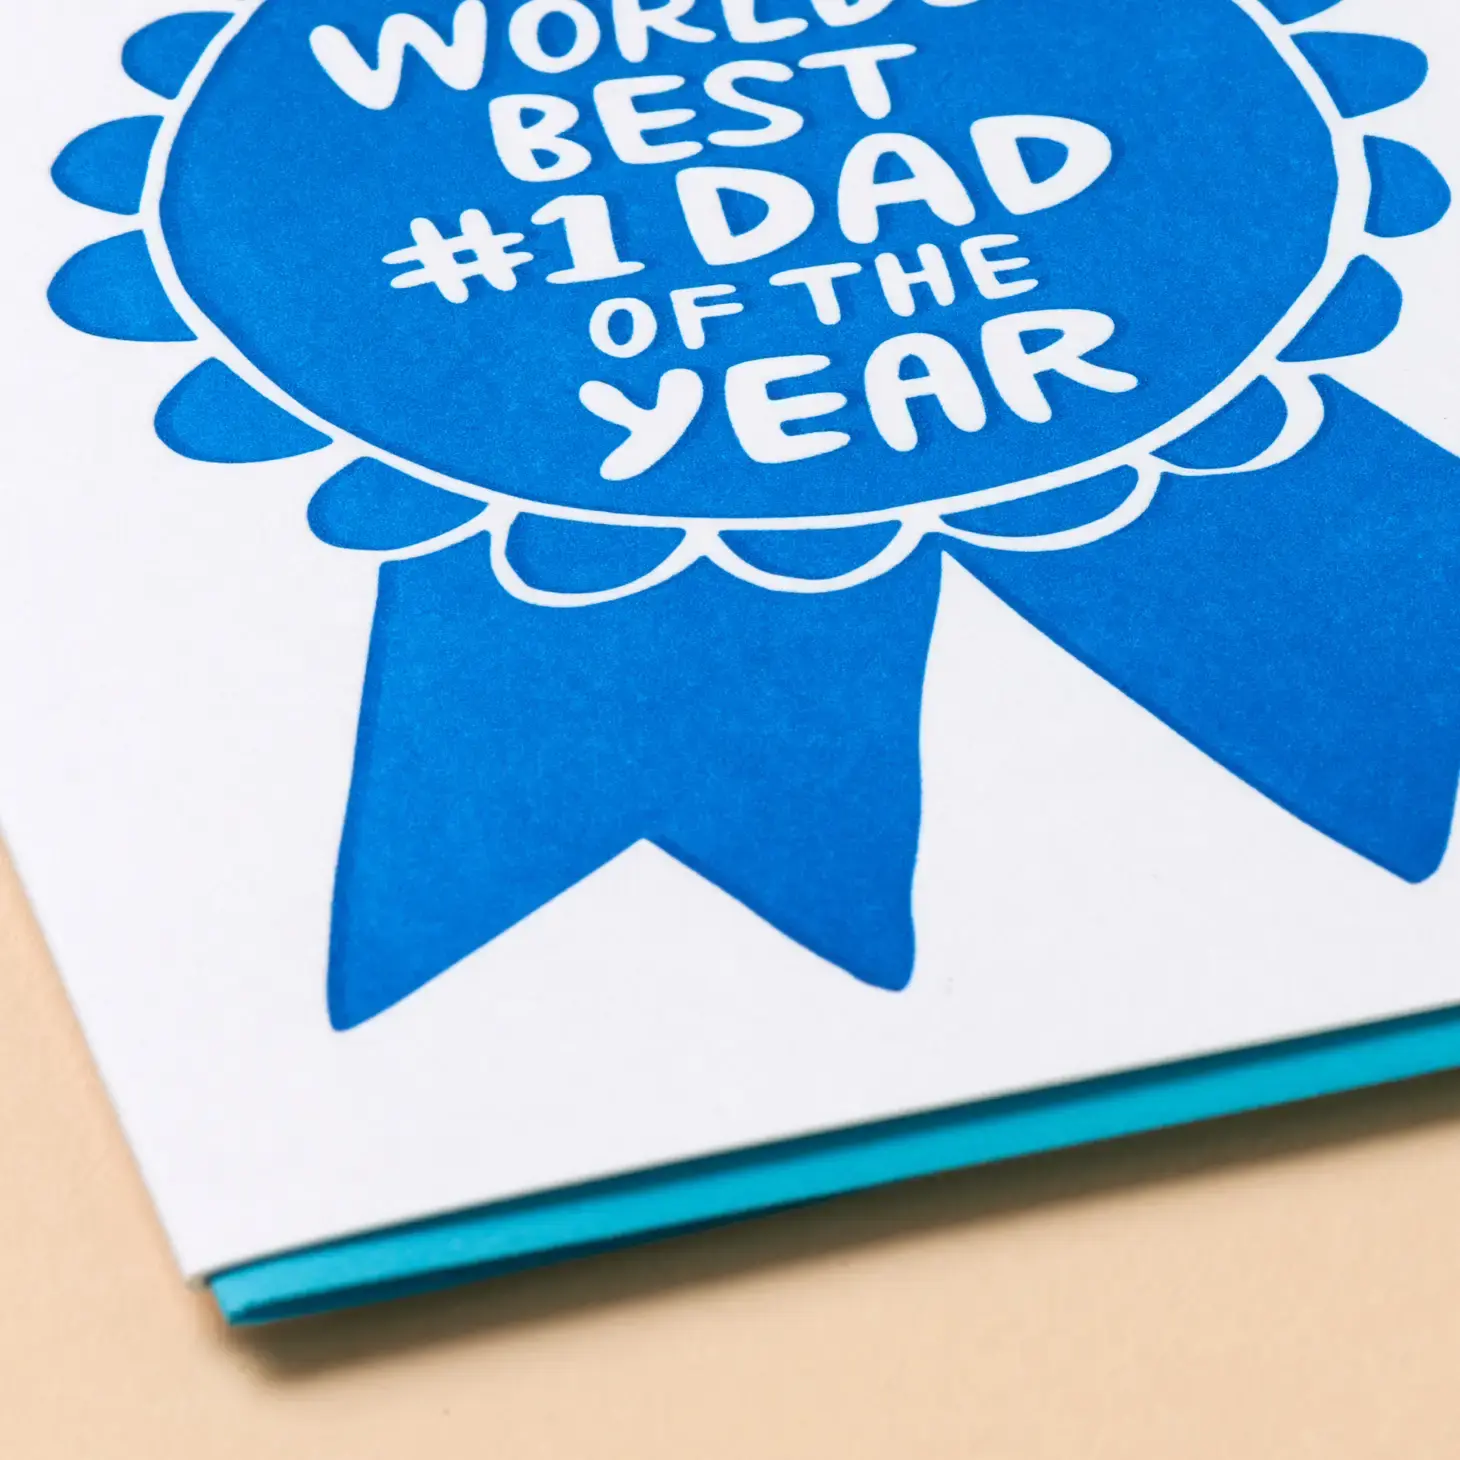 and Here We Are - AHW AHWGCFD - Blue Ribbon World's Best #1 Dad Father's Day Card